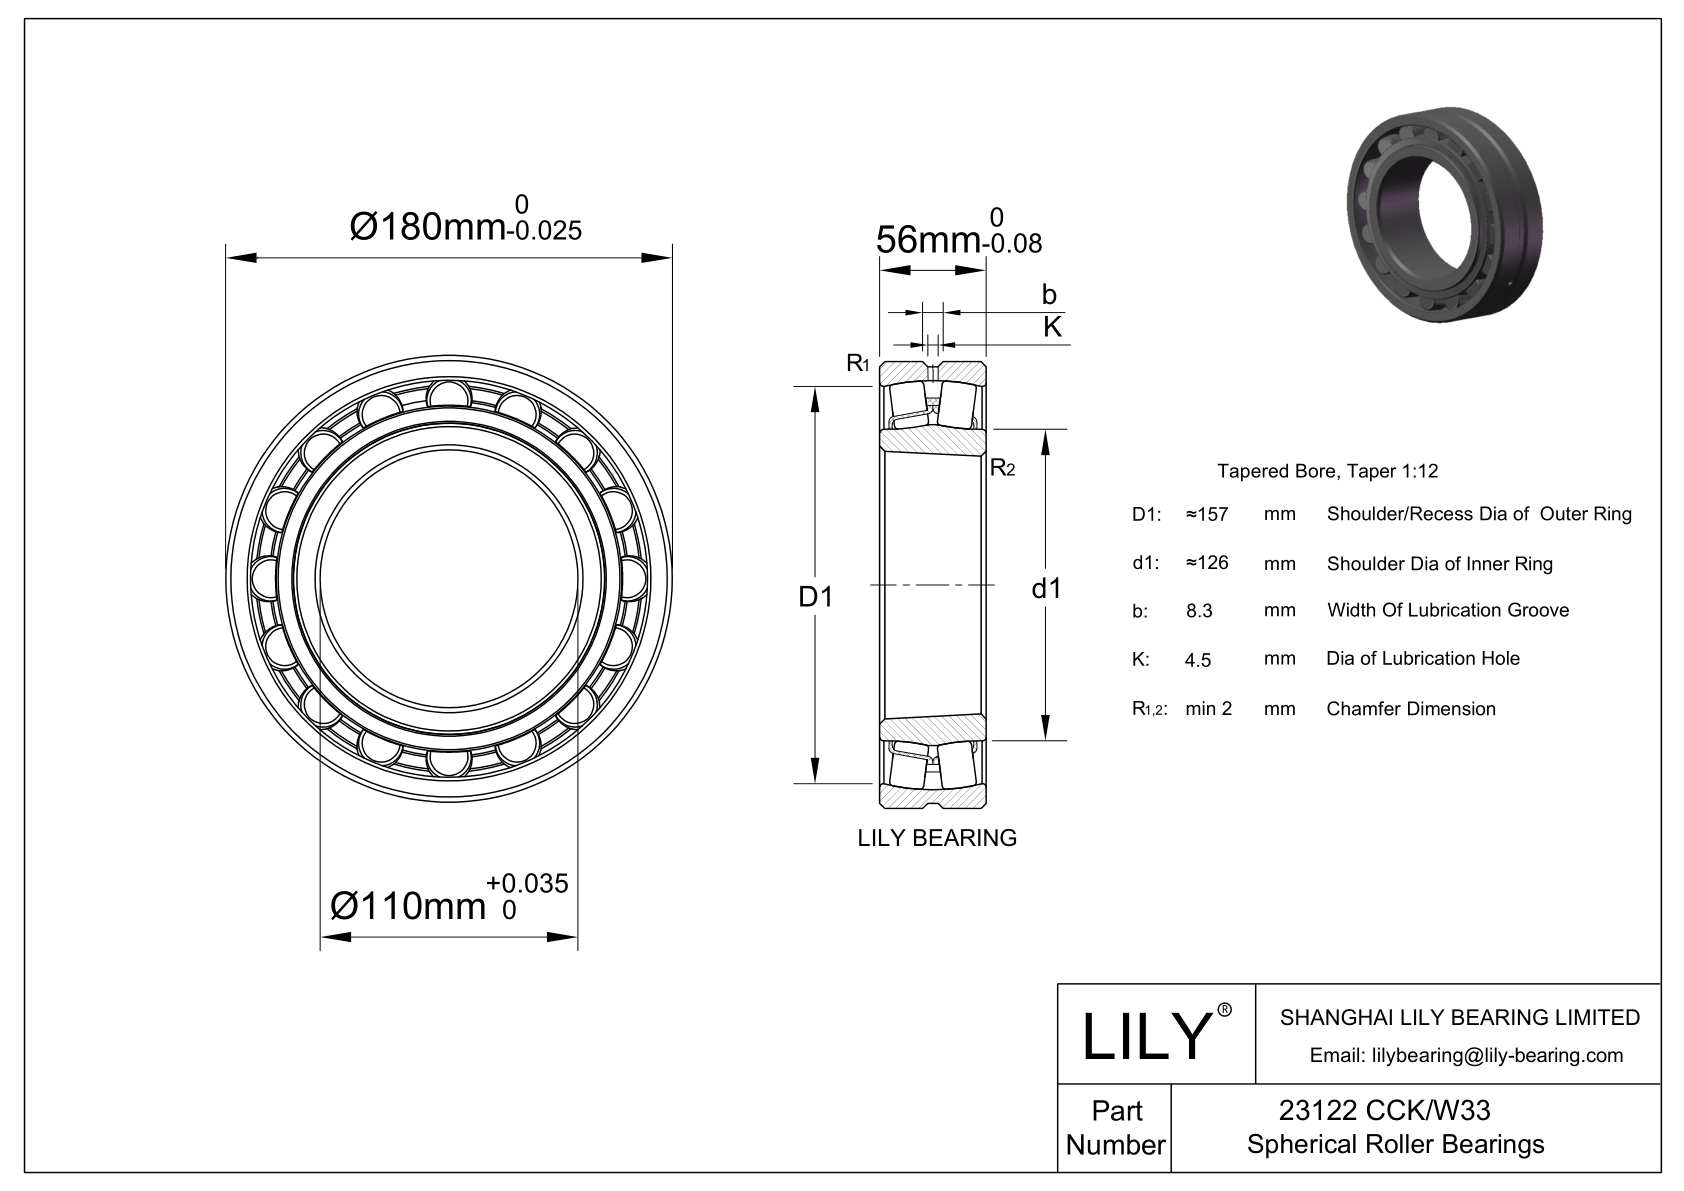 23122 CCK/W33 Double Row Spherical Roller Bearing cad drawing